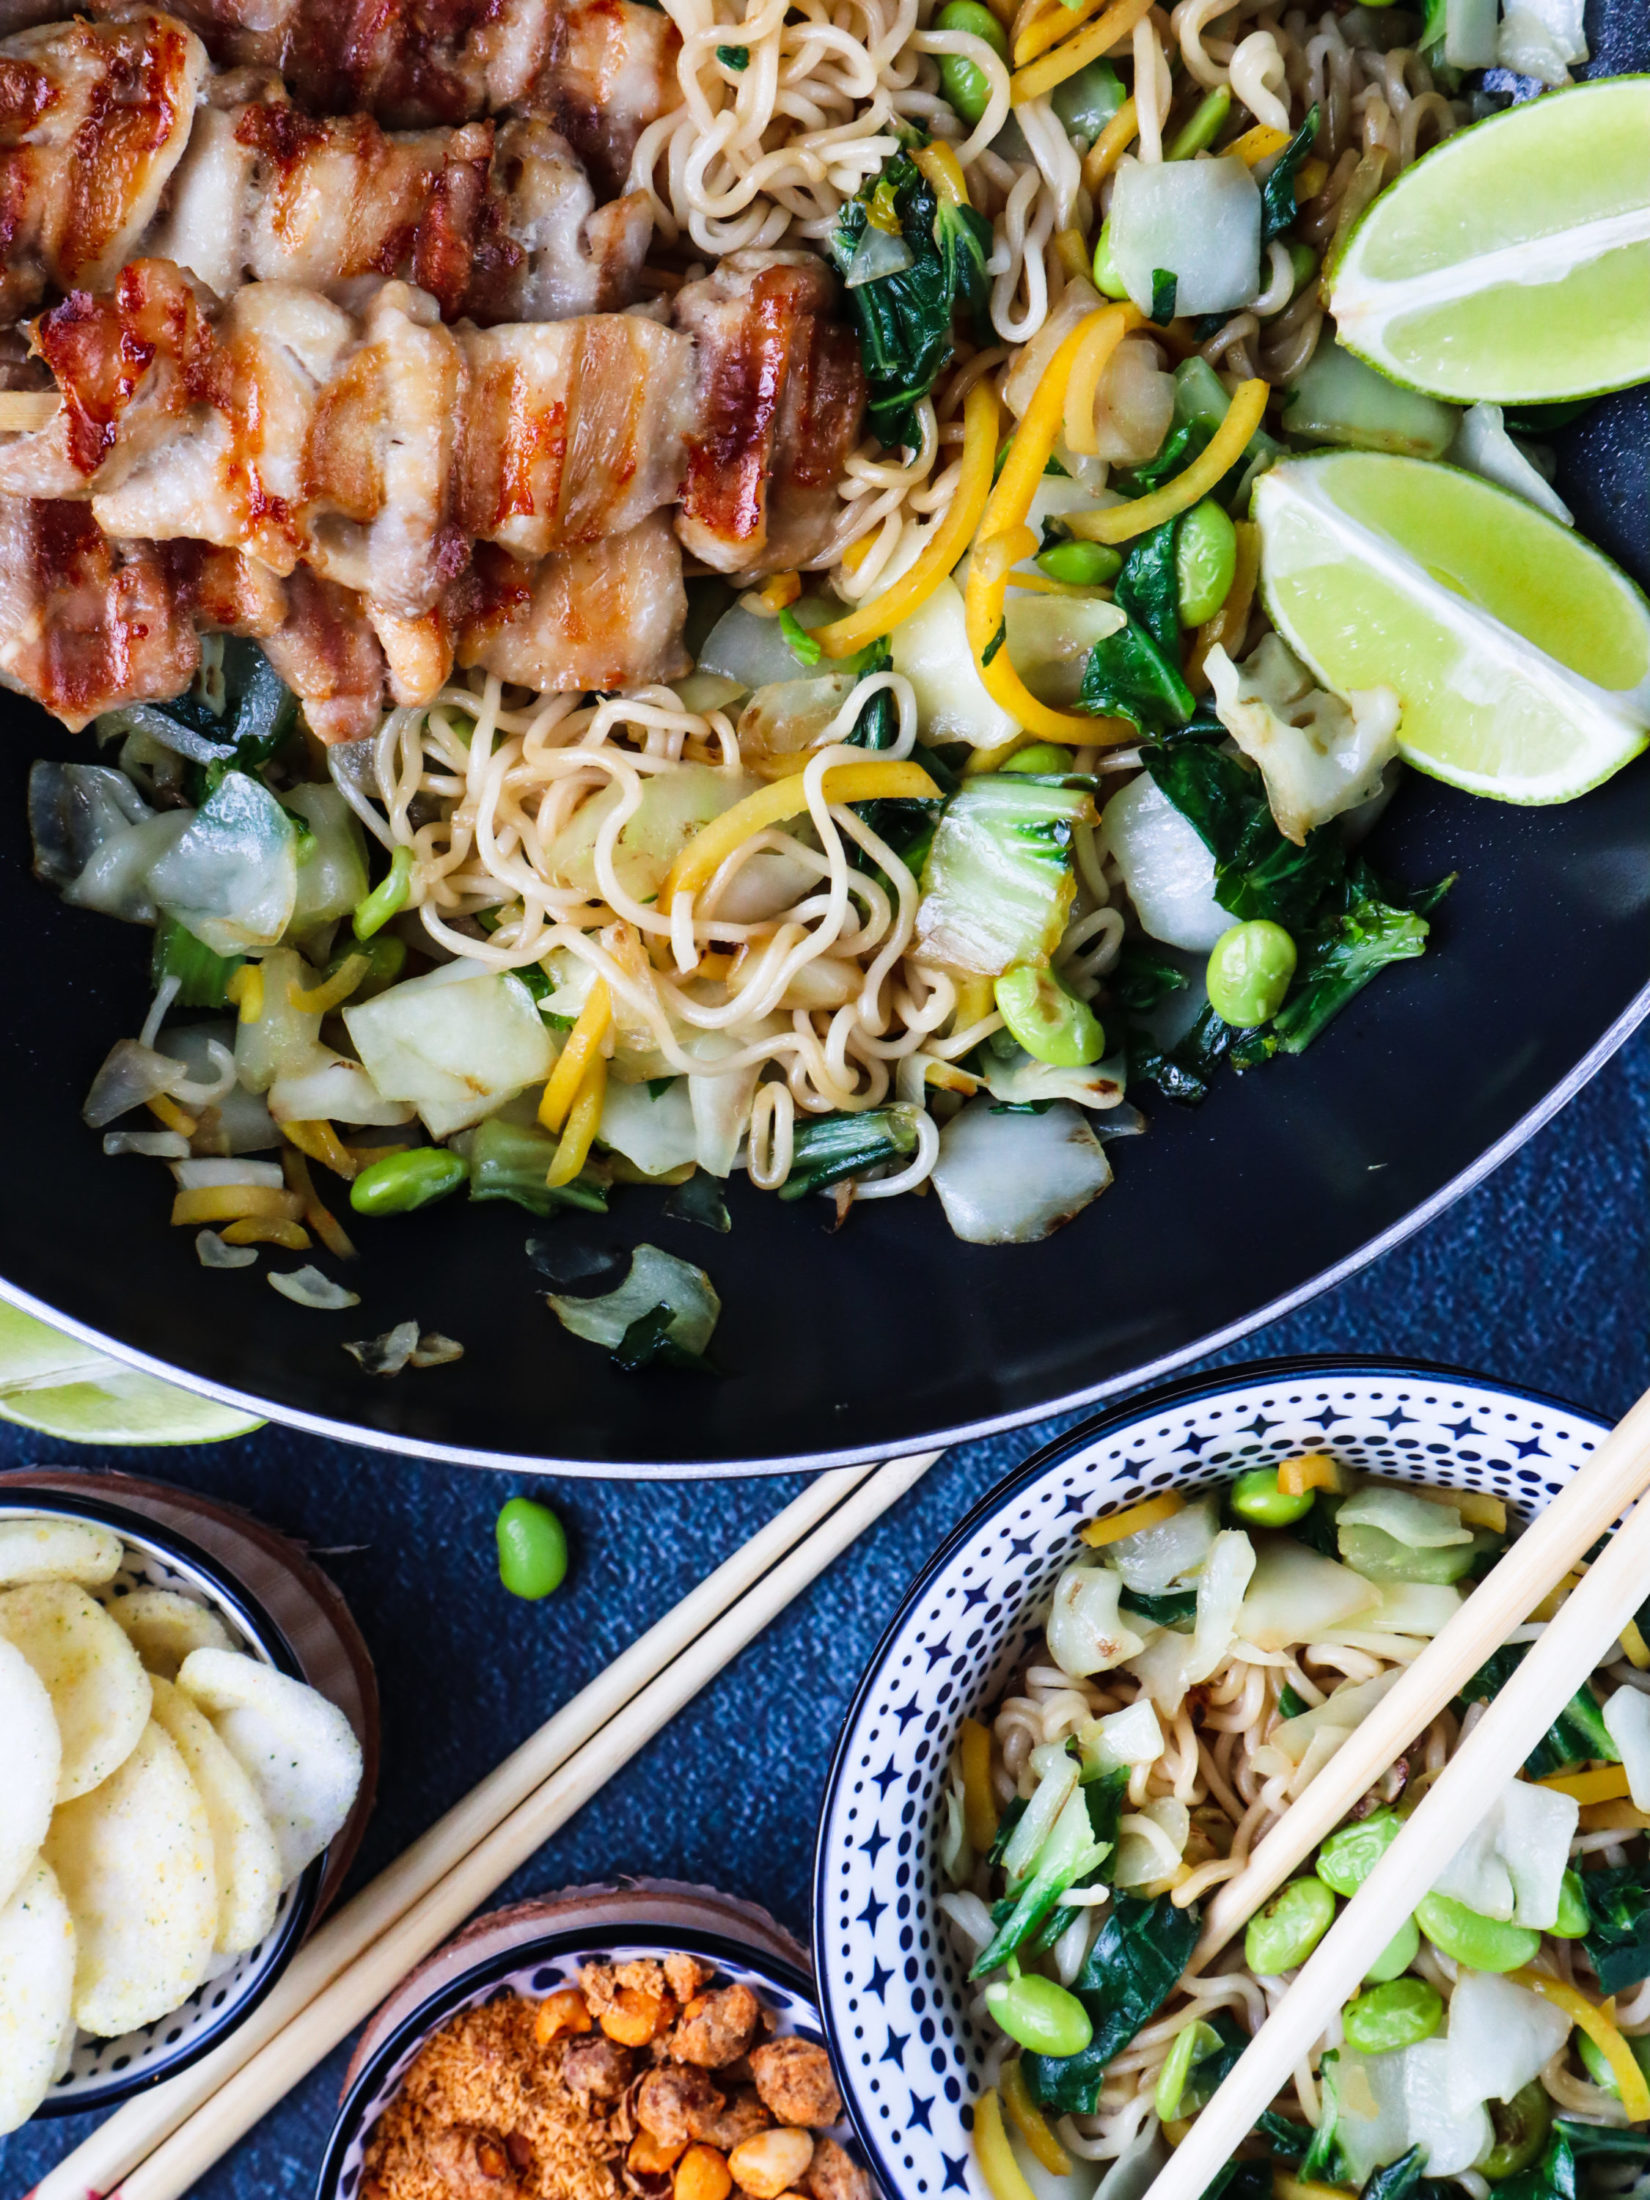 Wok noodles with chicken thigh skewers